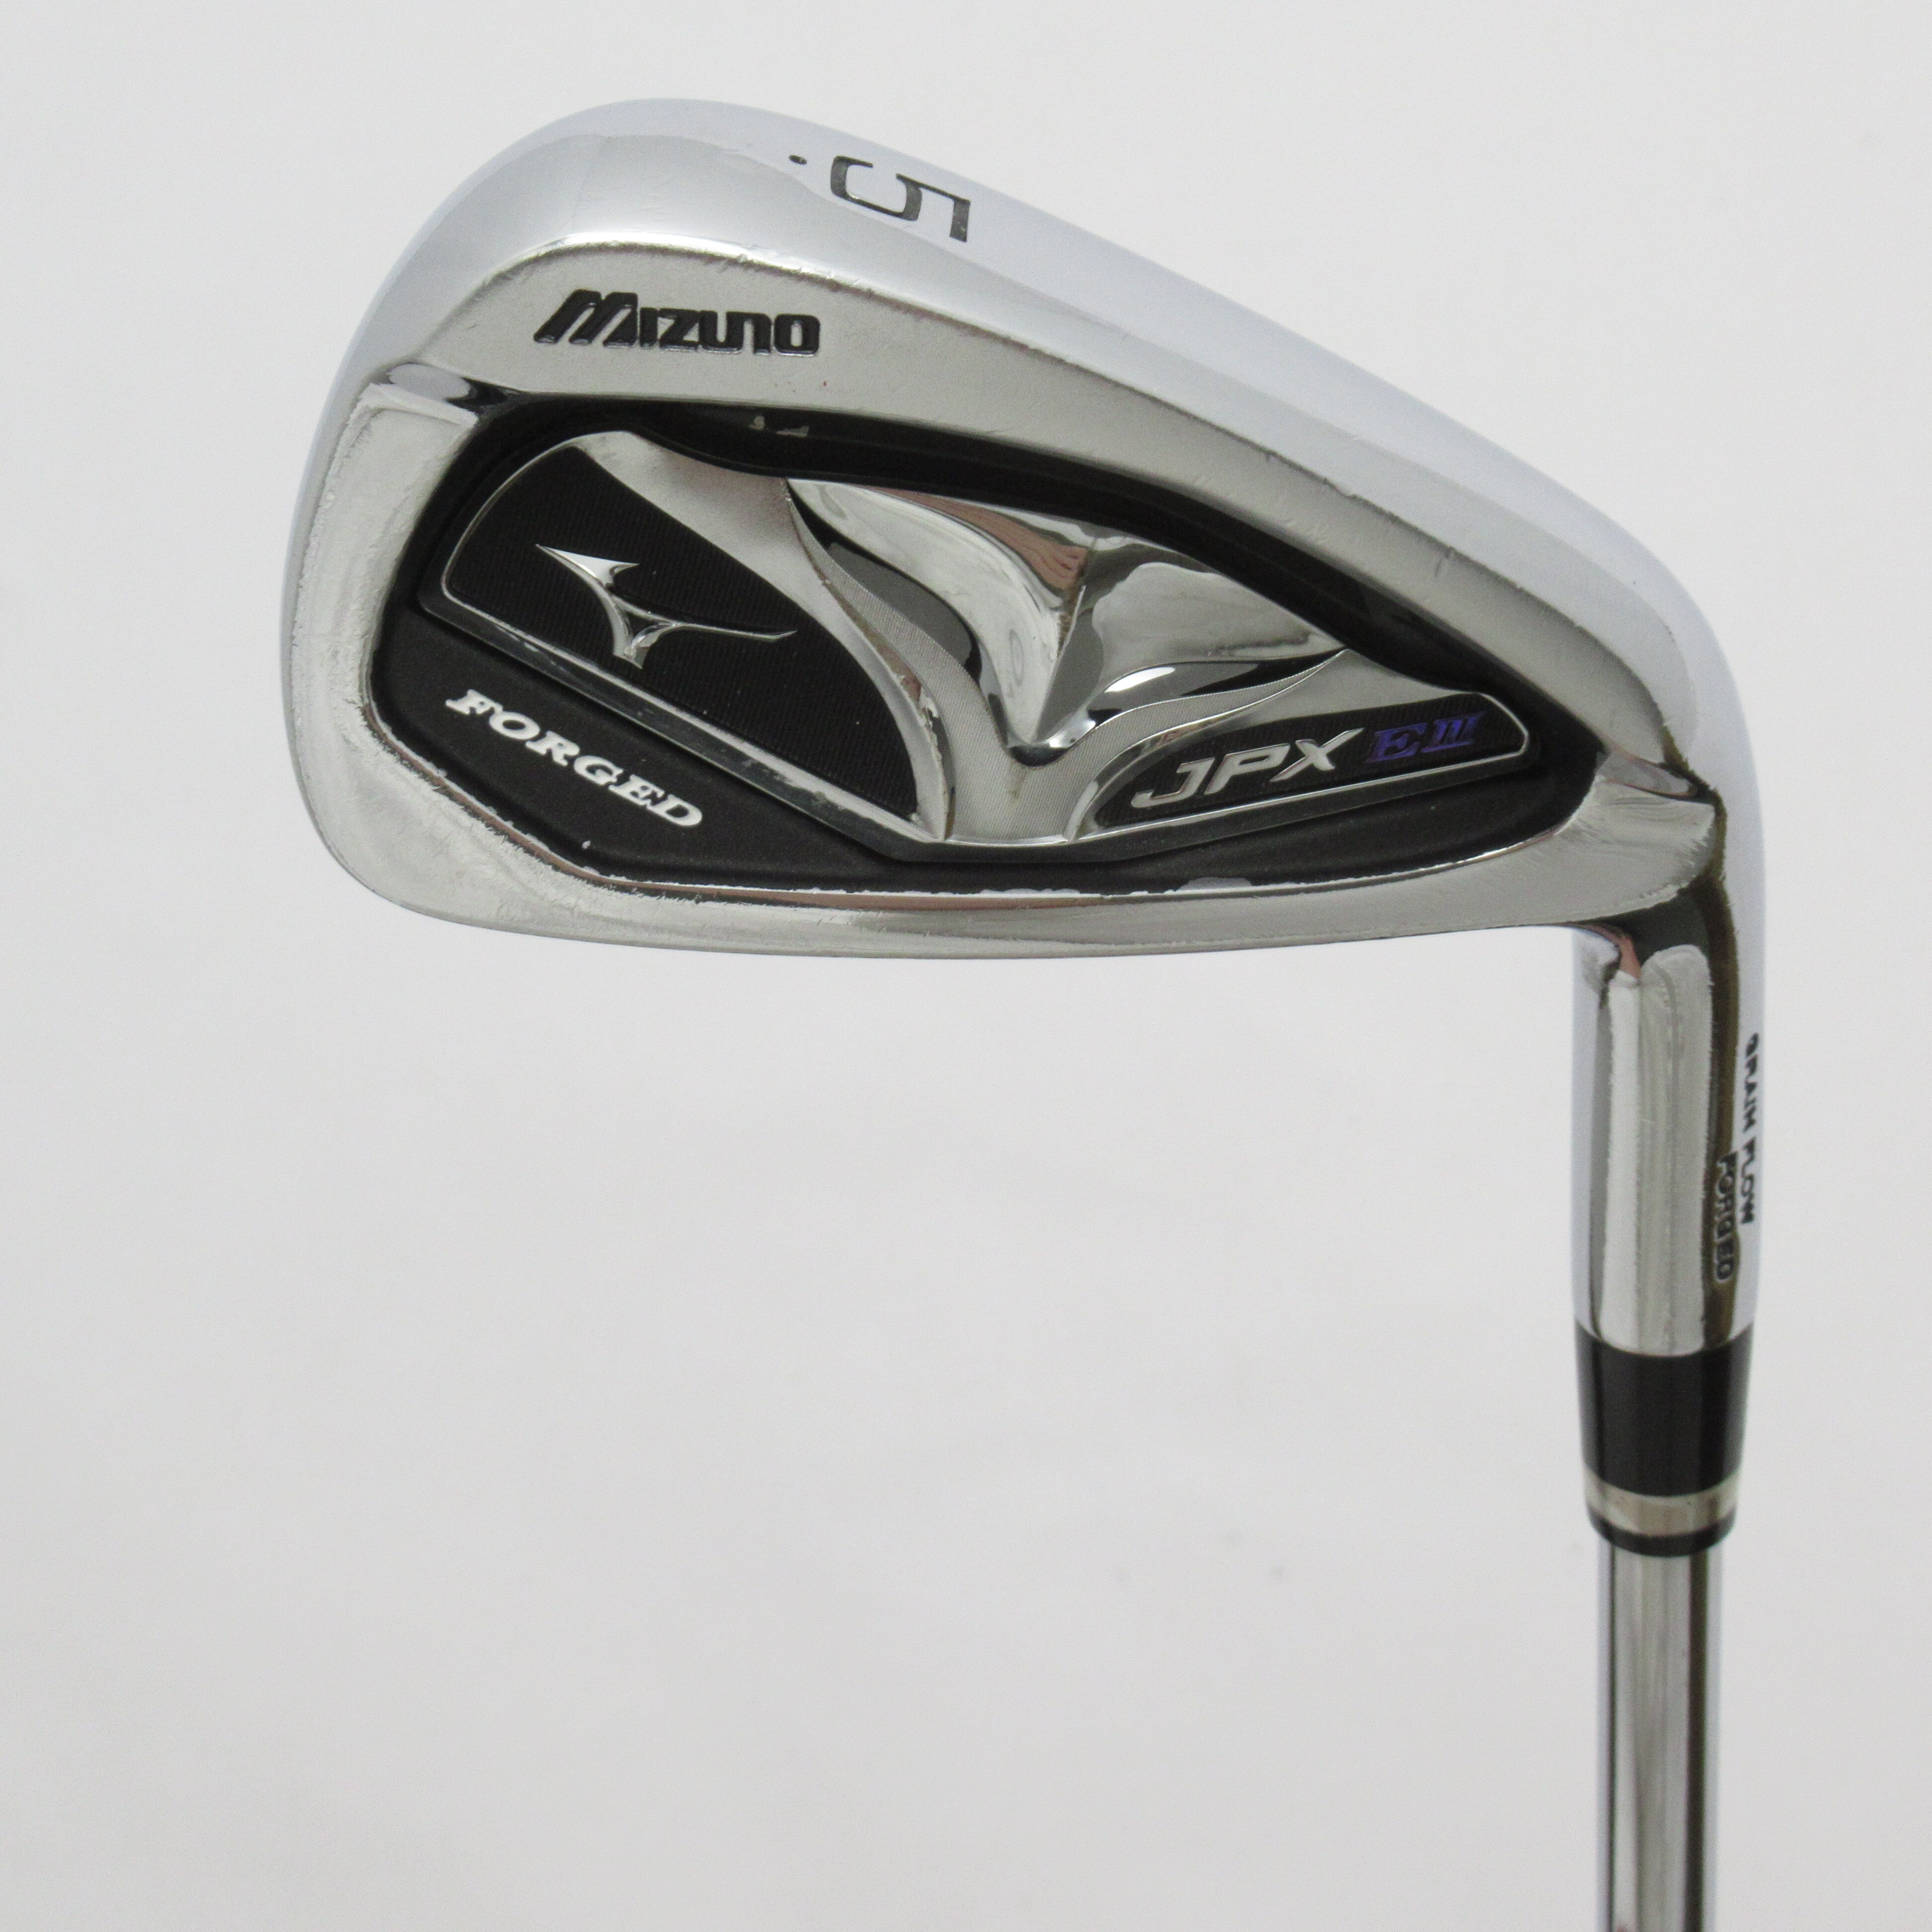 JPX E III FORGED 中古アイアンセット ミズノ 通販｜GDO中古ゴルフクラブ